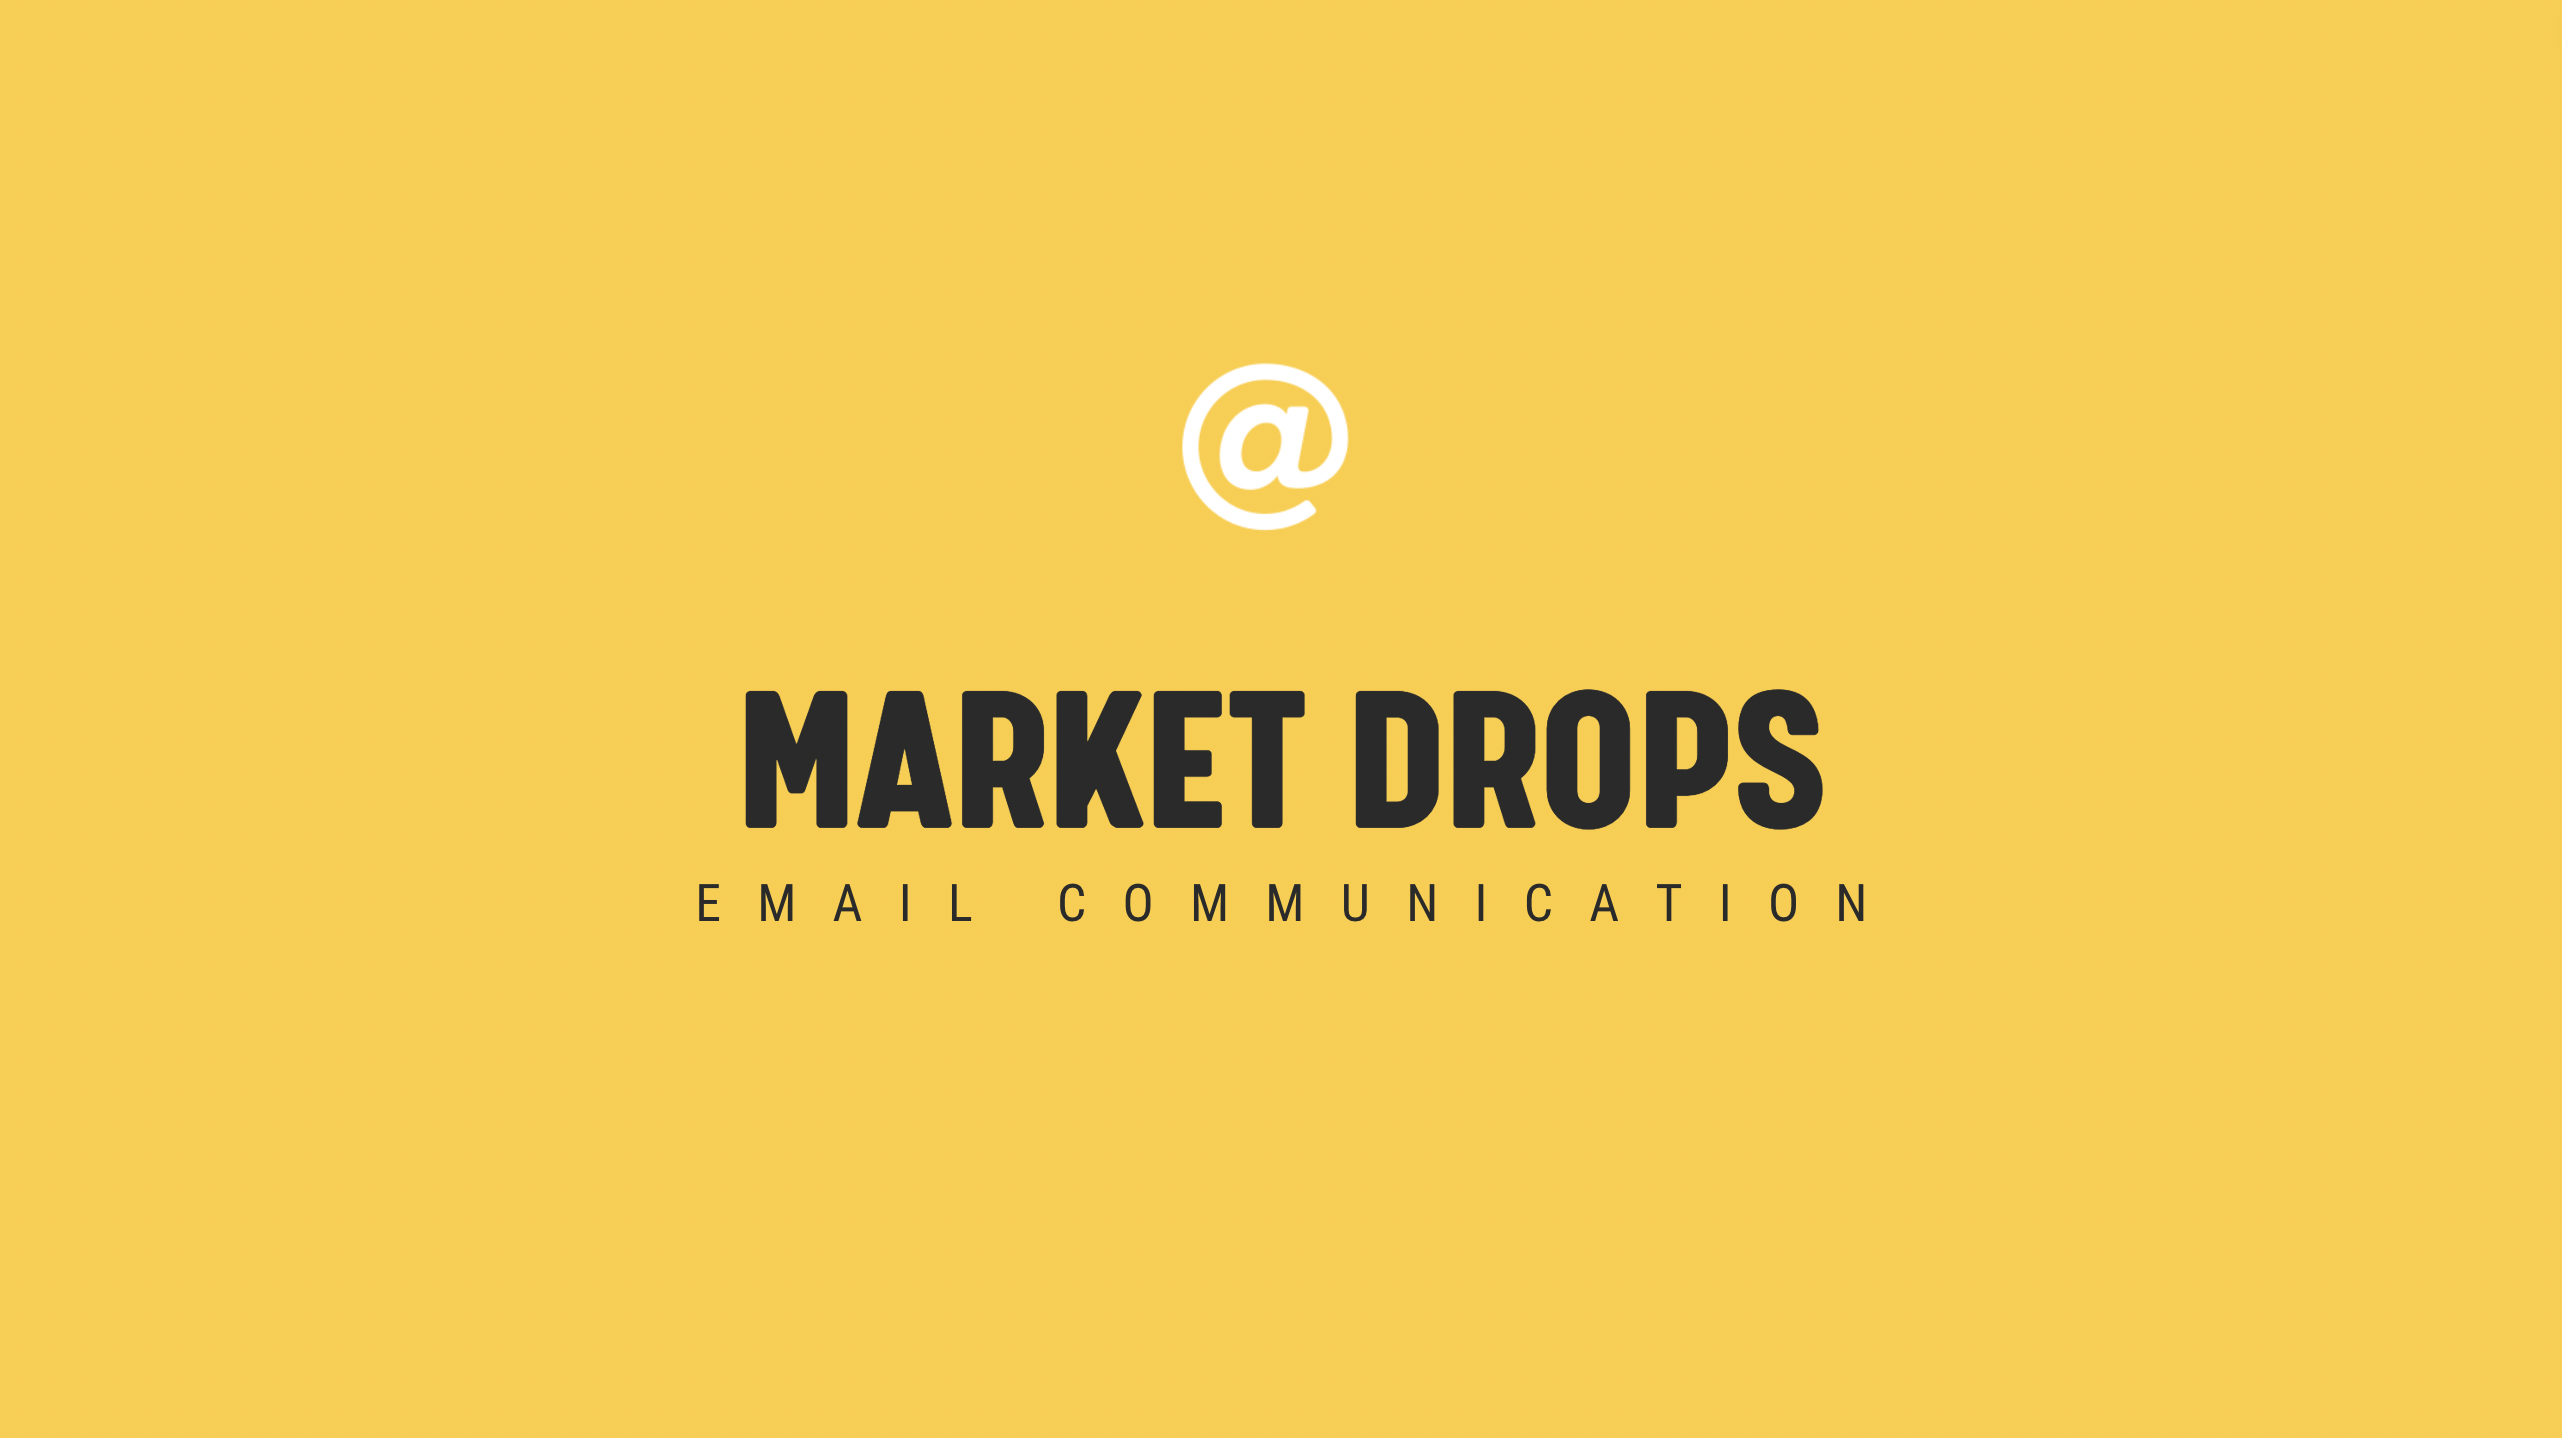 [NEW] Market Drops - Timely Email